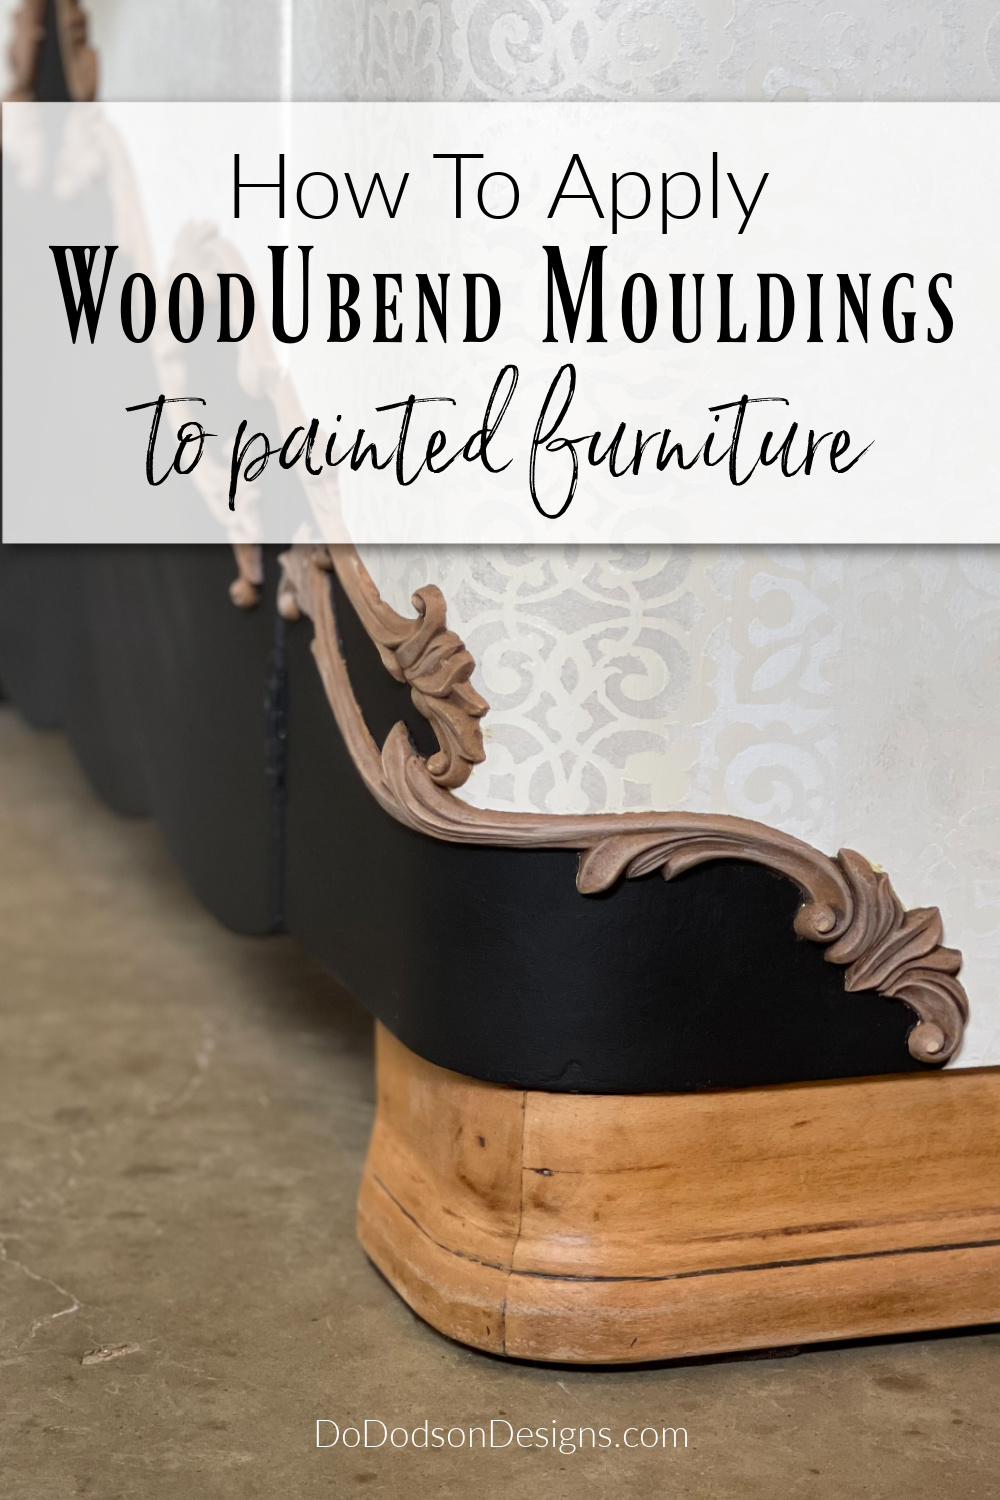 The Best (WoodUbend) Moudlings For Painted Furniture And How To Use Them